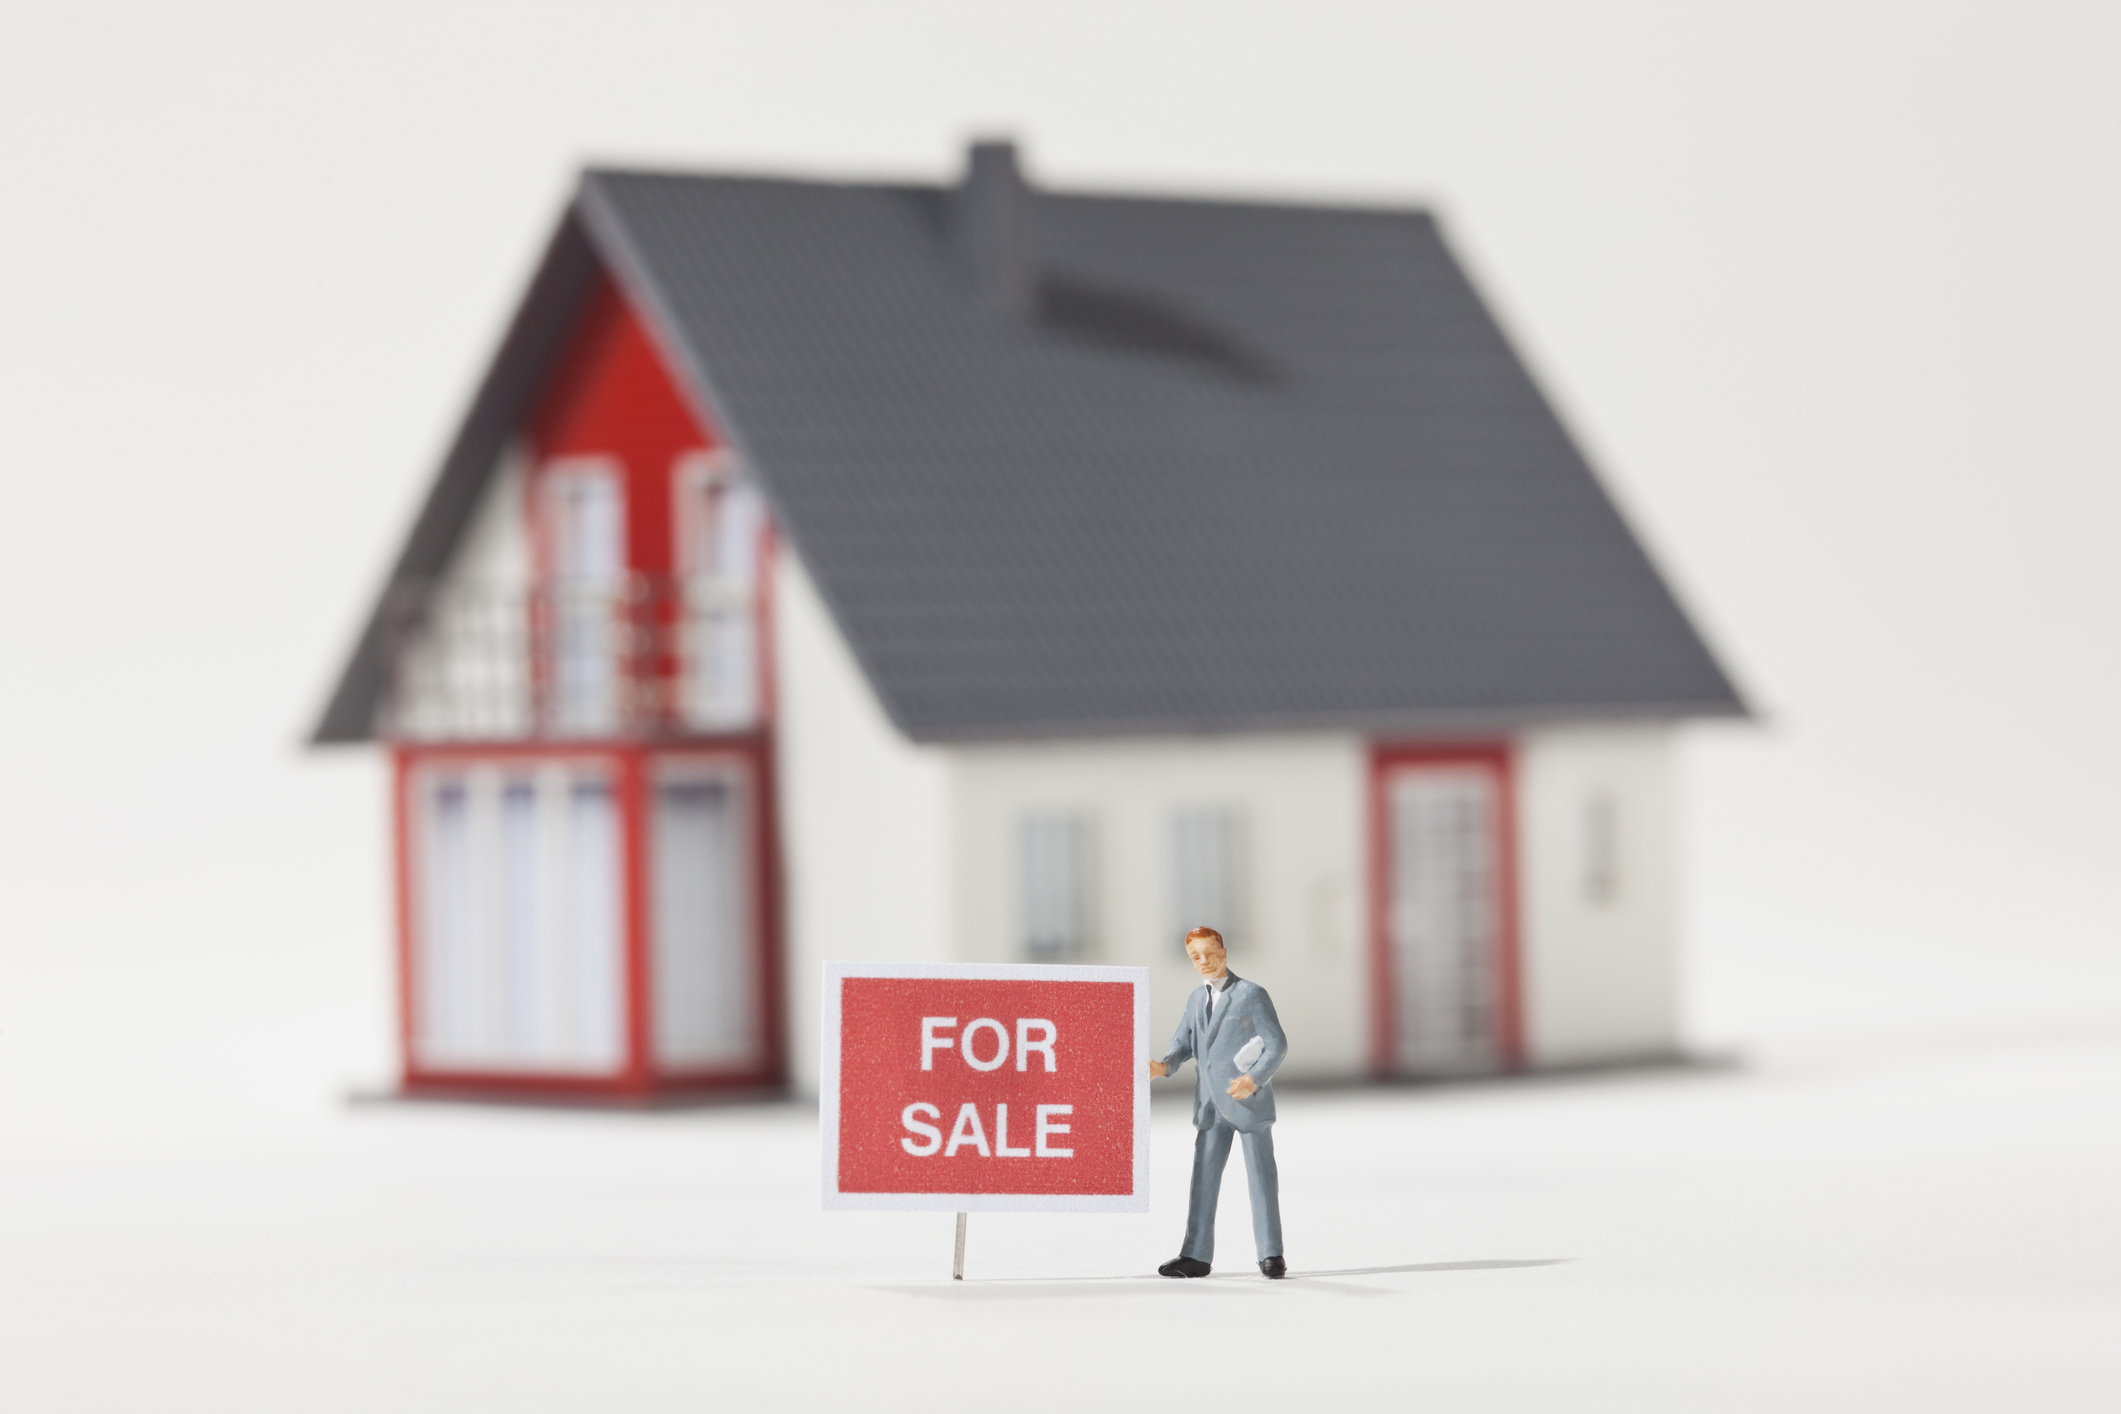 A miniature real estate agent figurine standing next to a FOR SALE sign